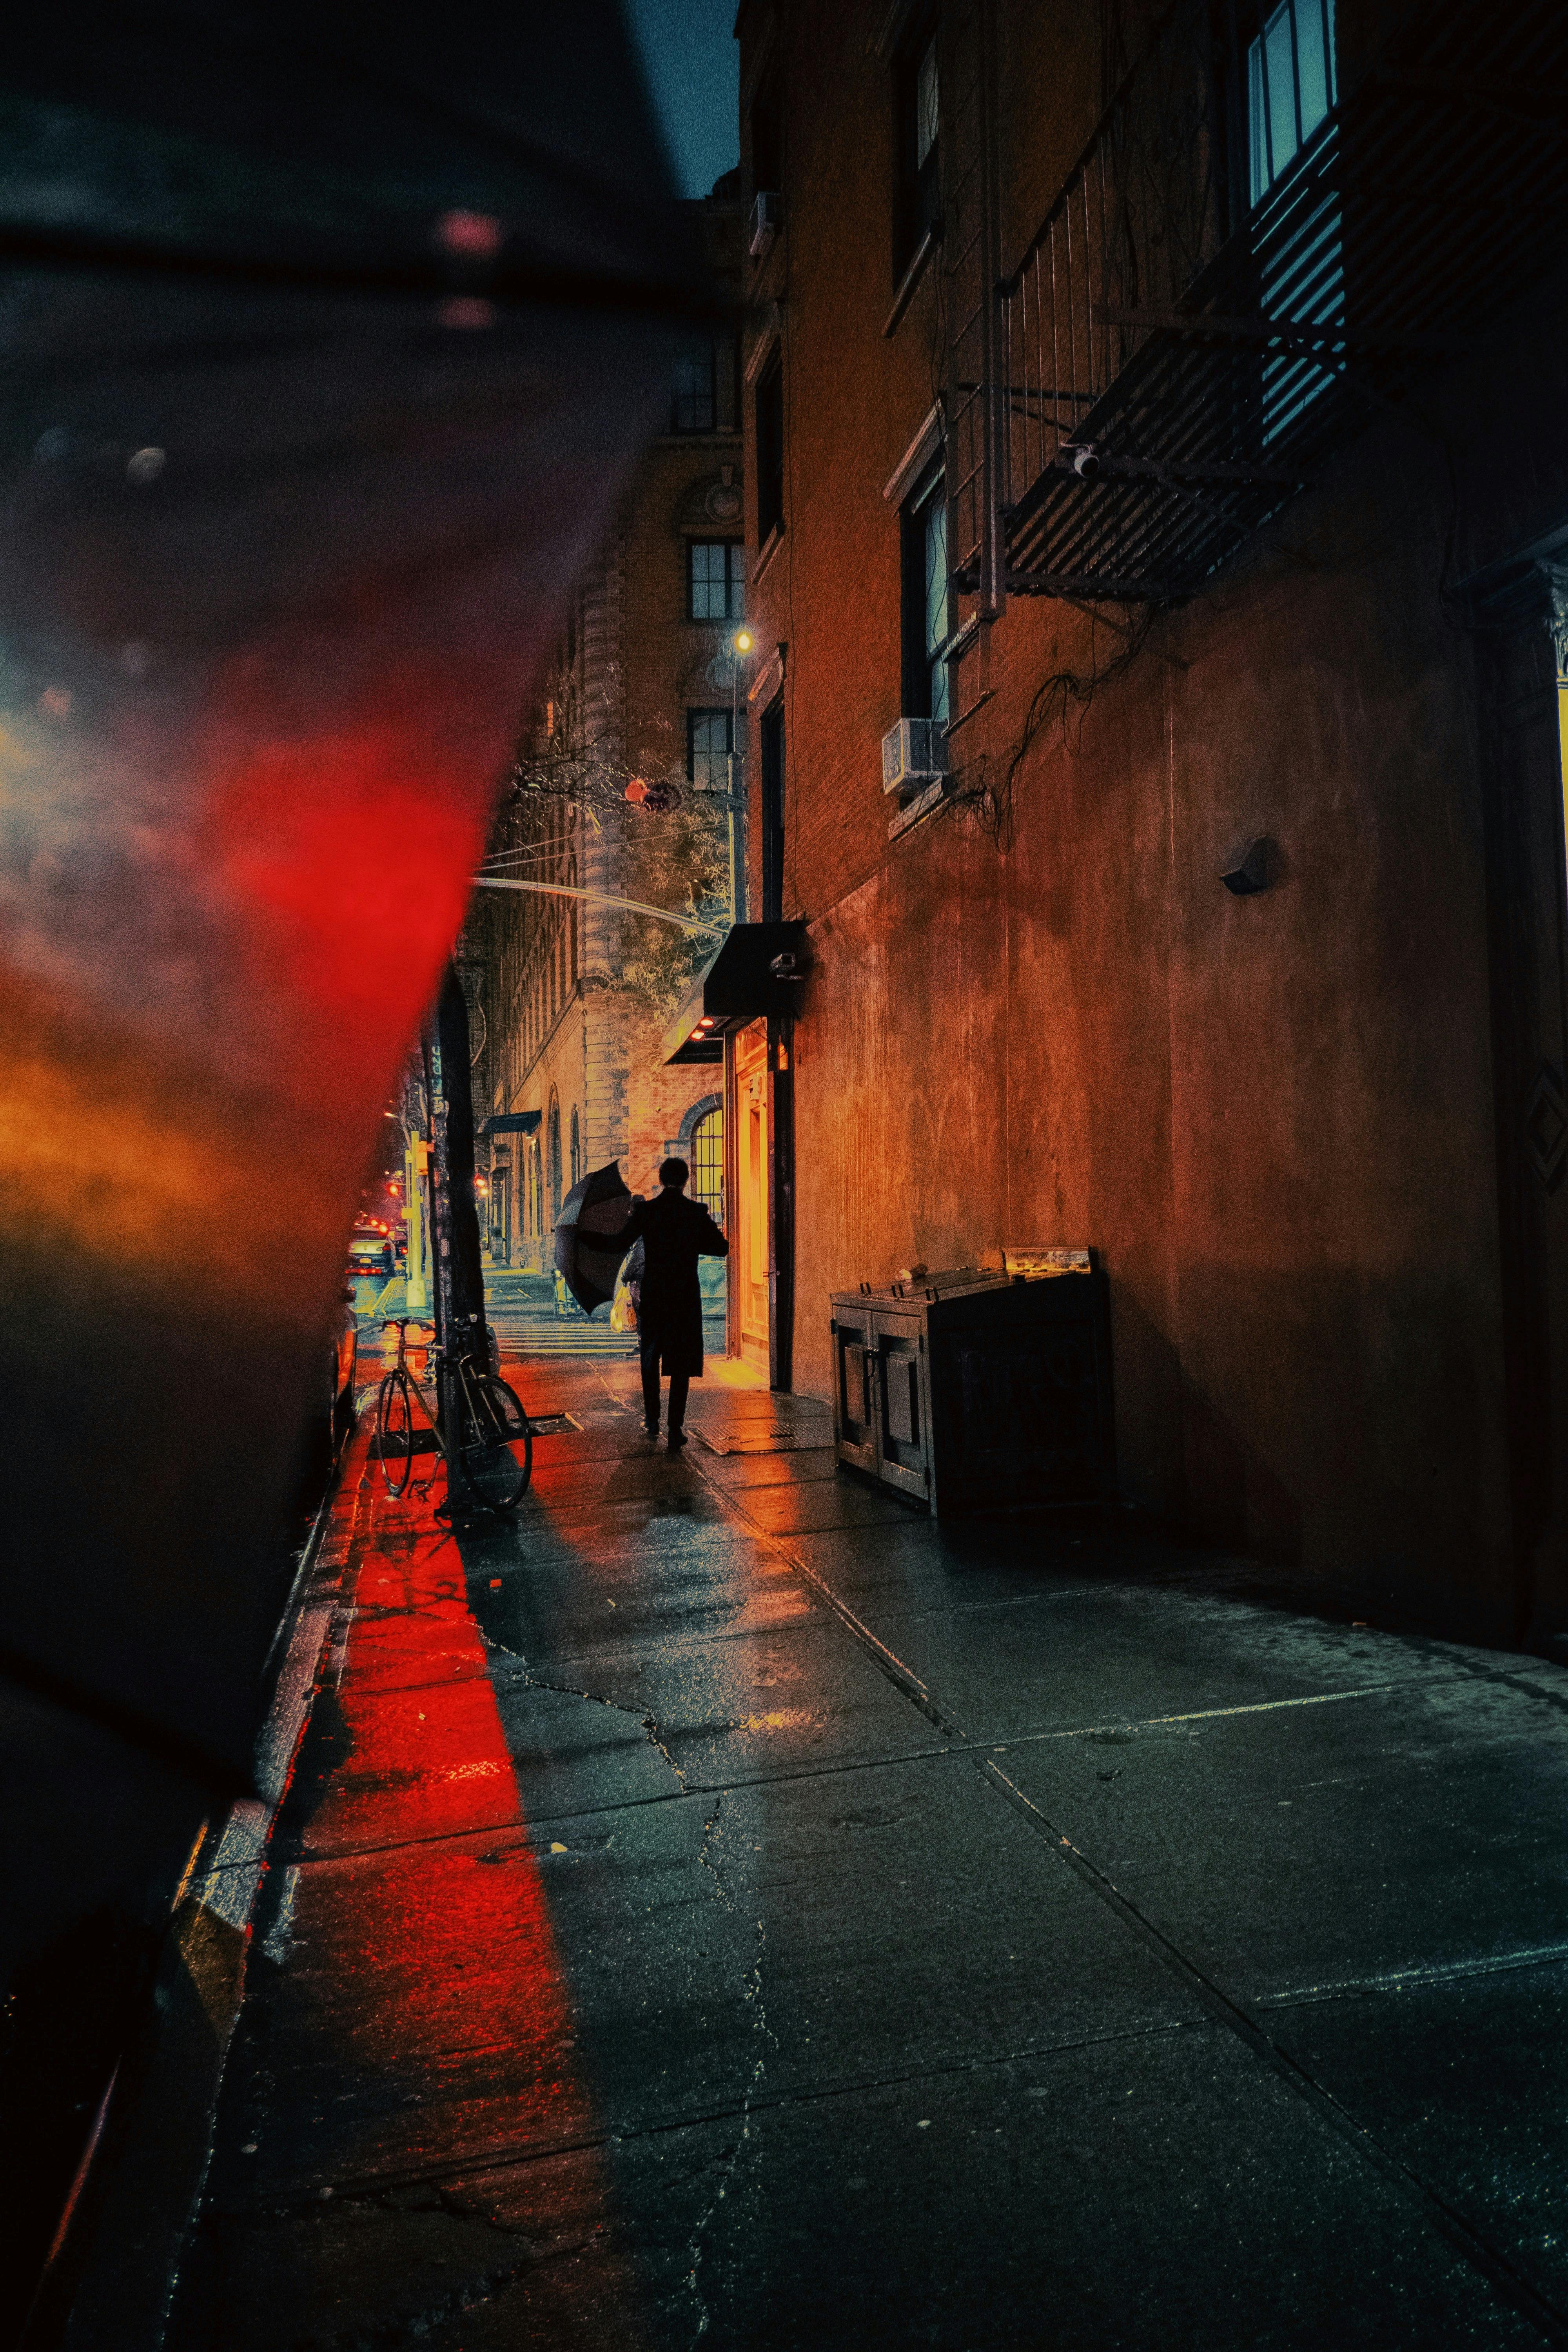 silhouette of person with umbrella on street